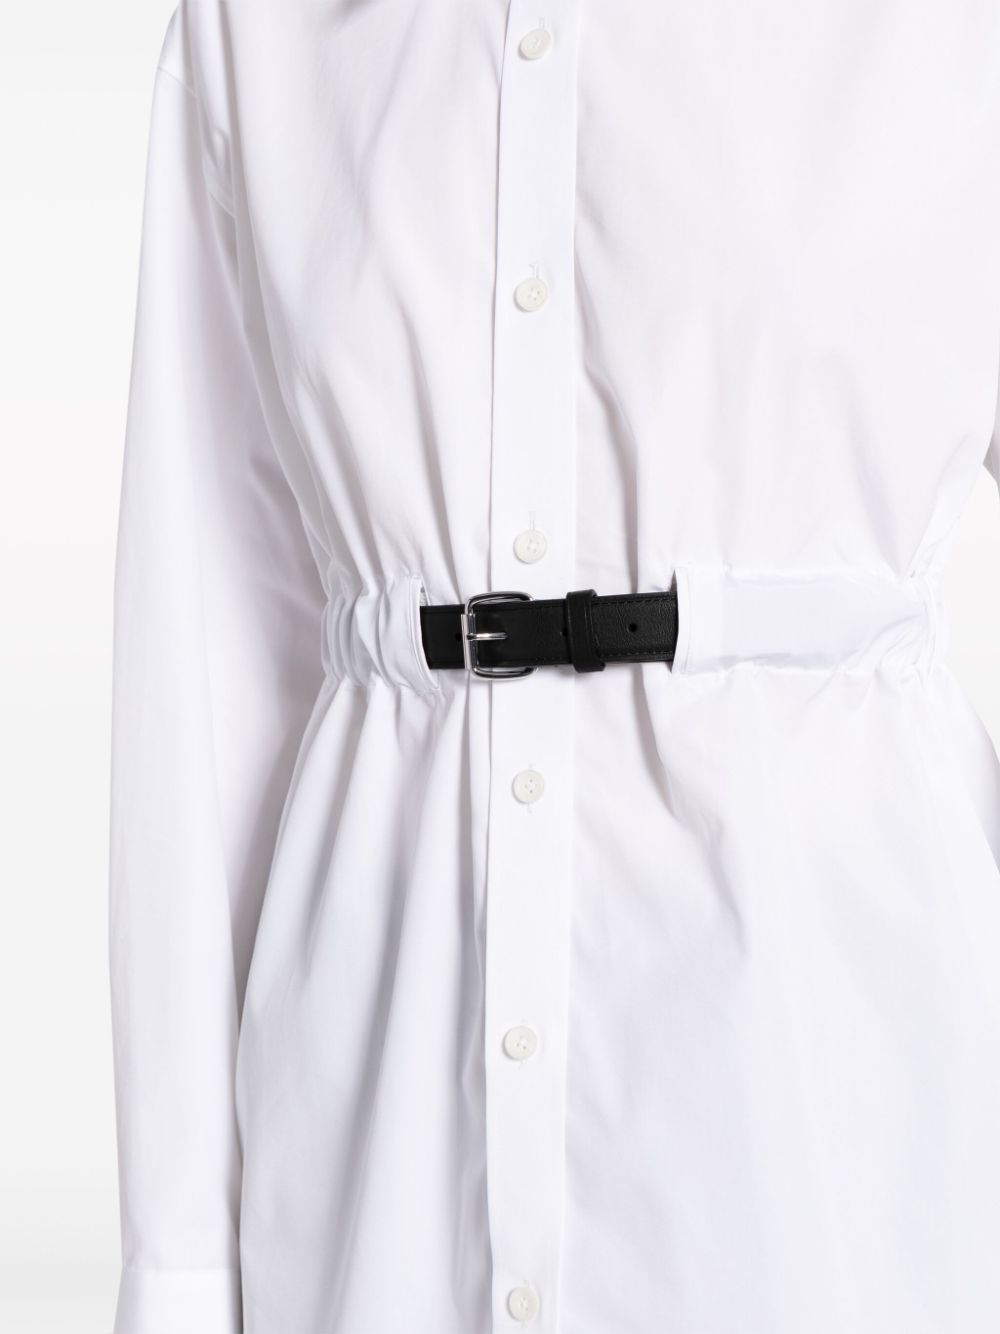 Belted cotton tunic shirt<BR/><BR/><BR/>